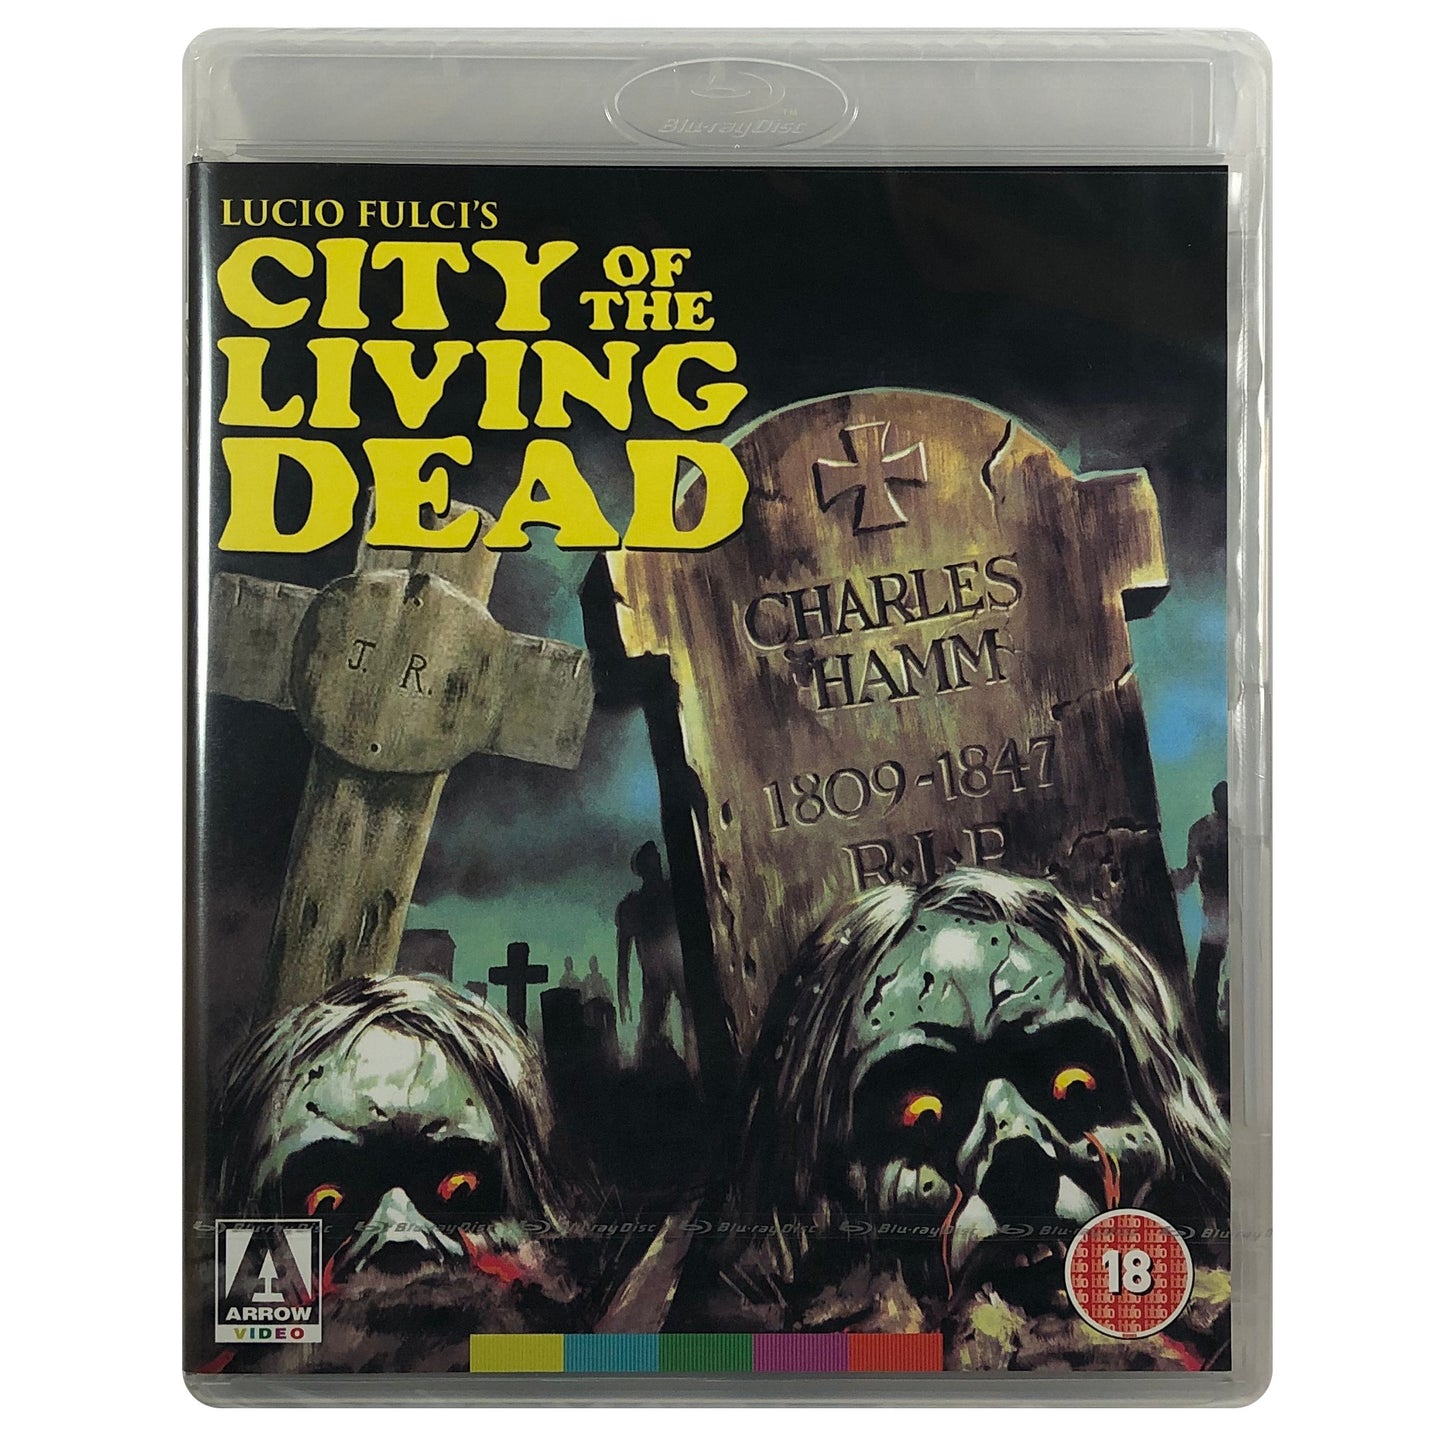 City of the Living Dead Blu-Ray